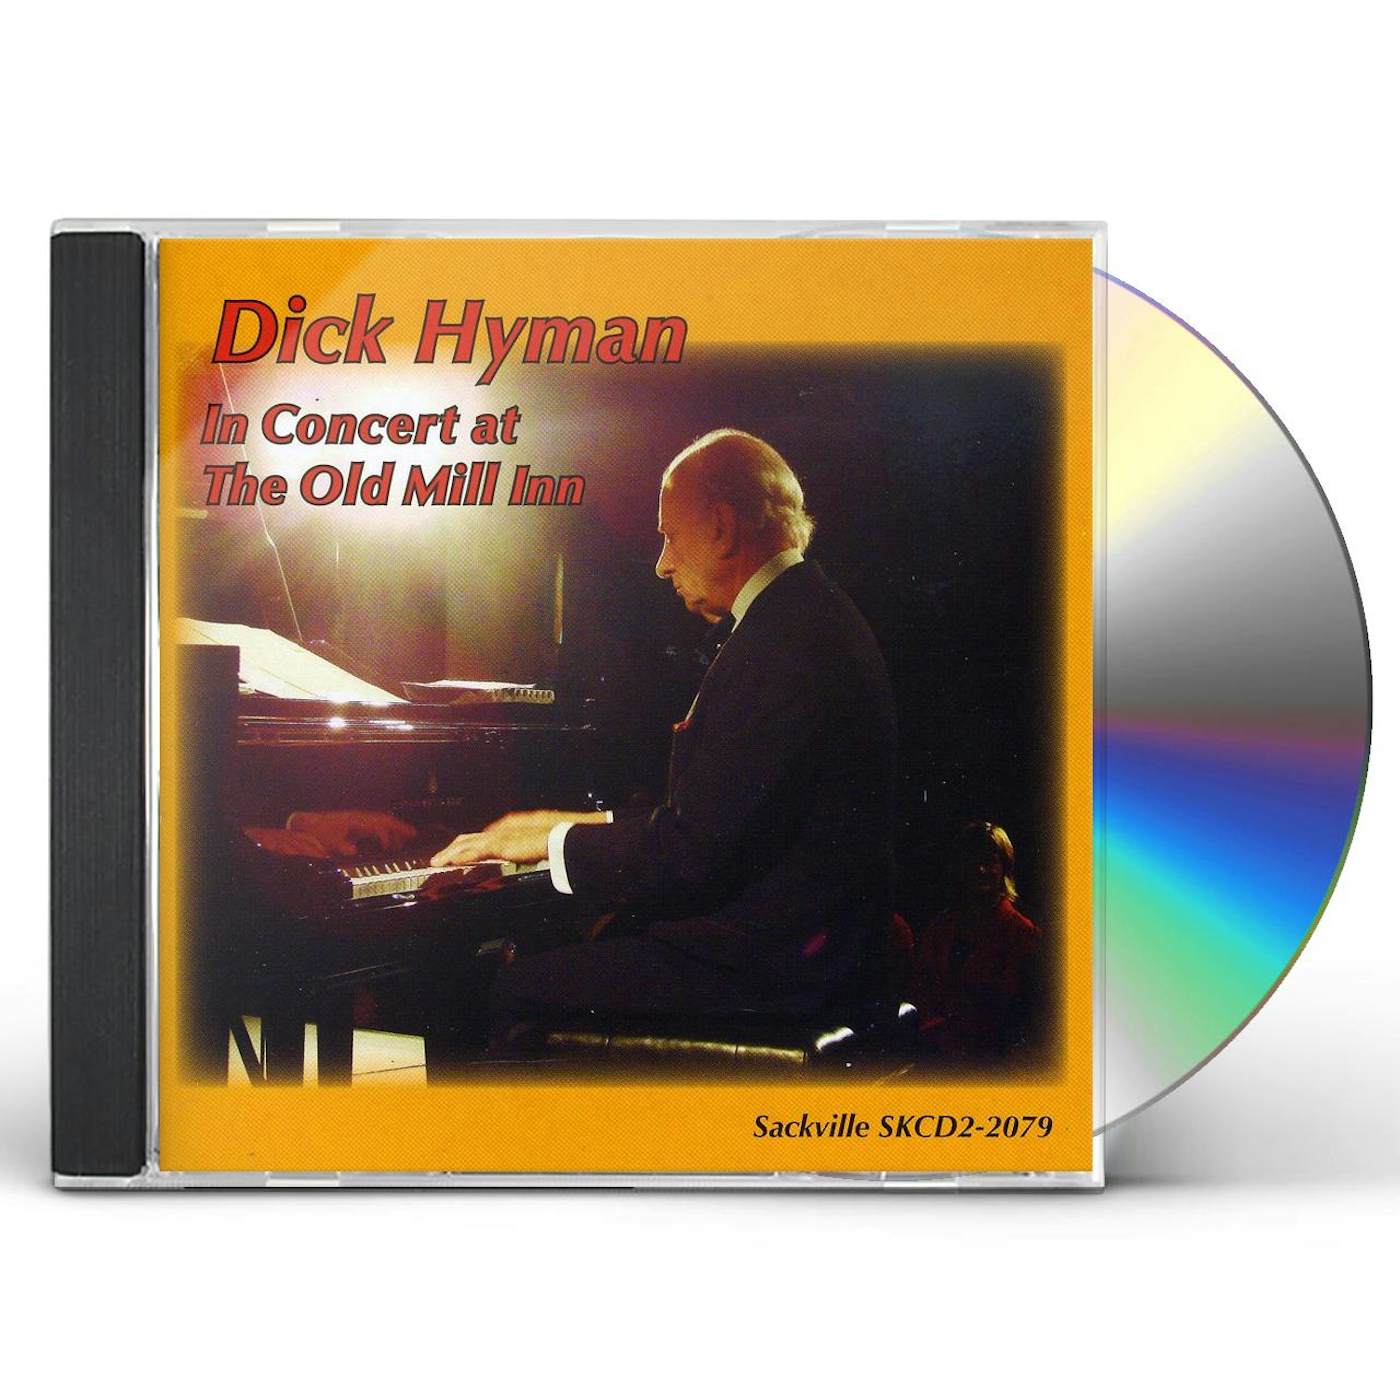 Dick Hyman IN CONCERT AT THE OLD MILL INN CD